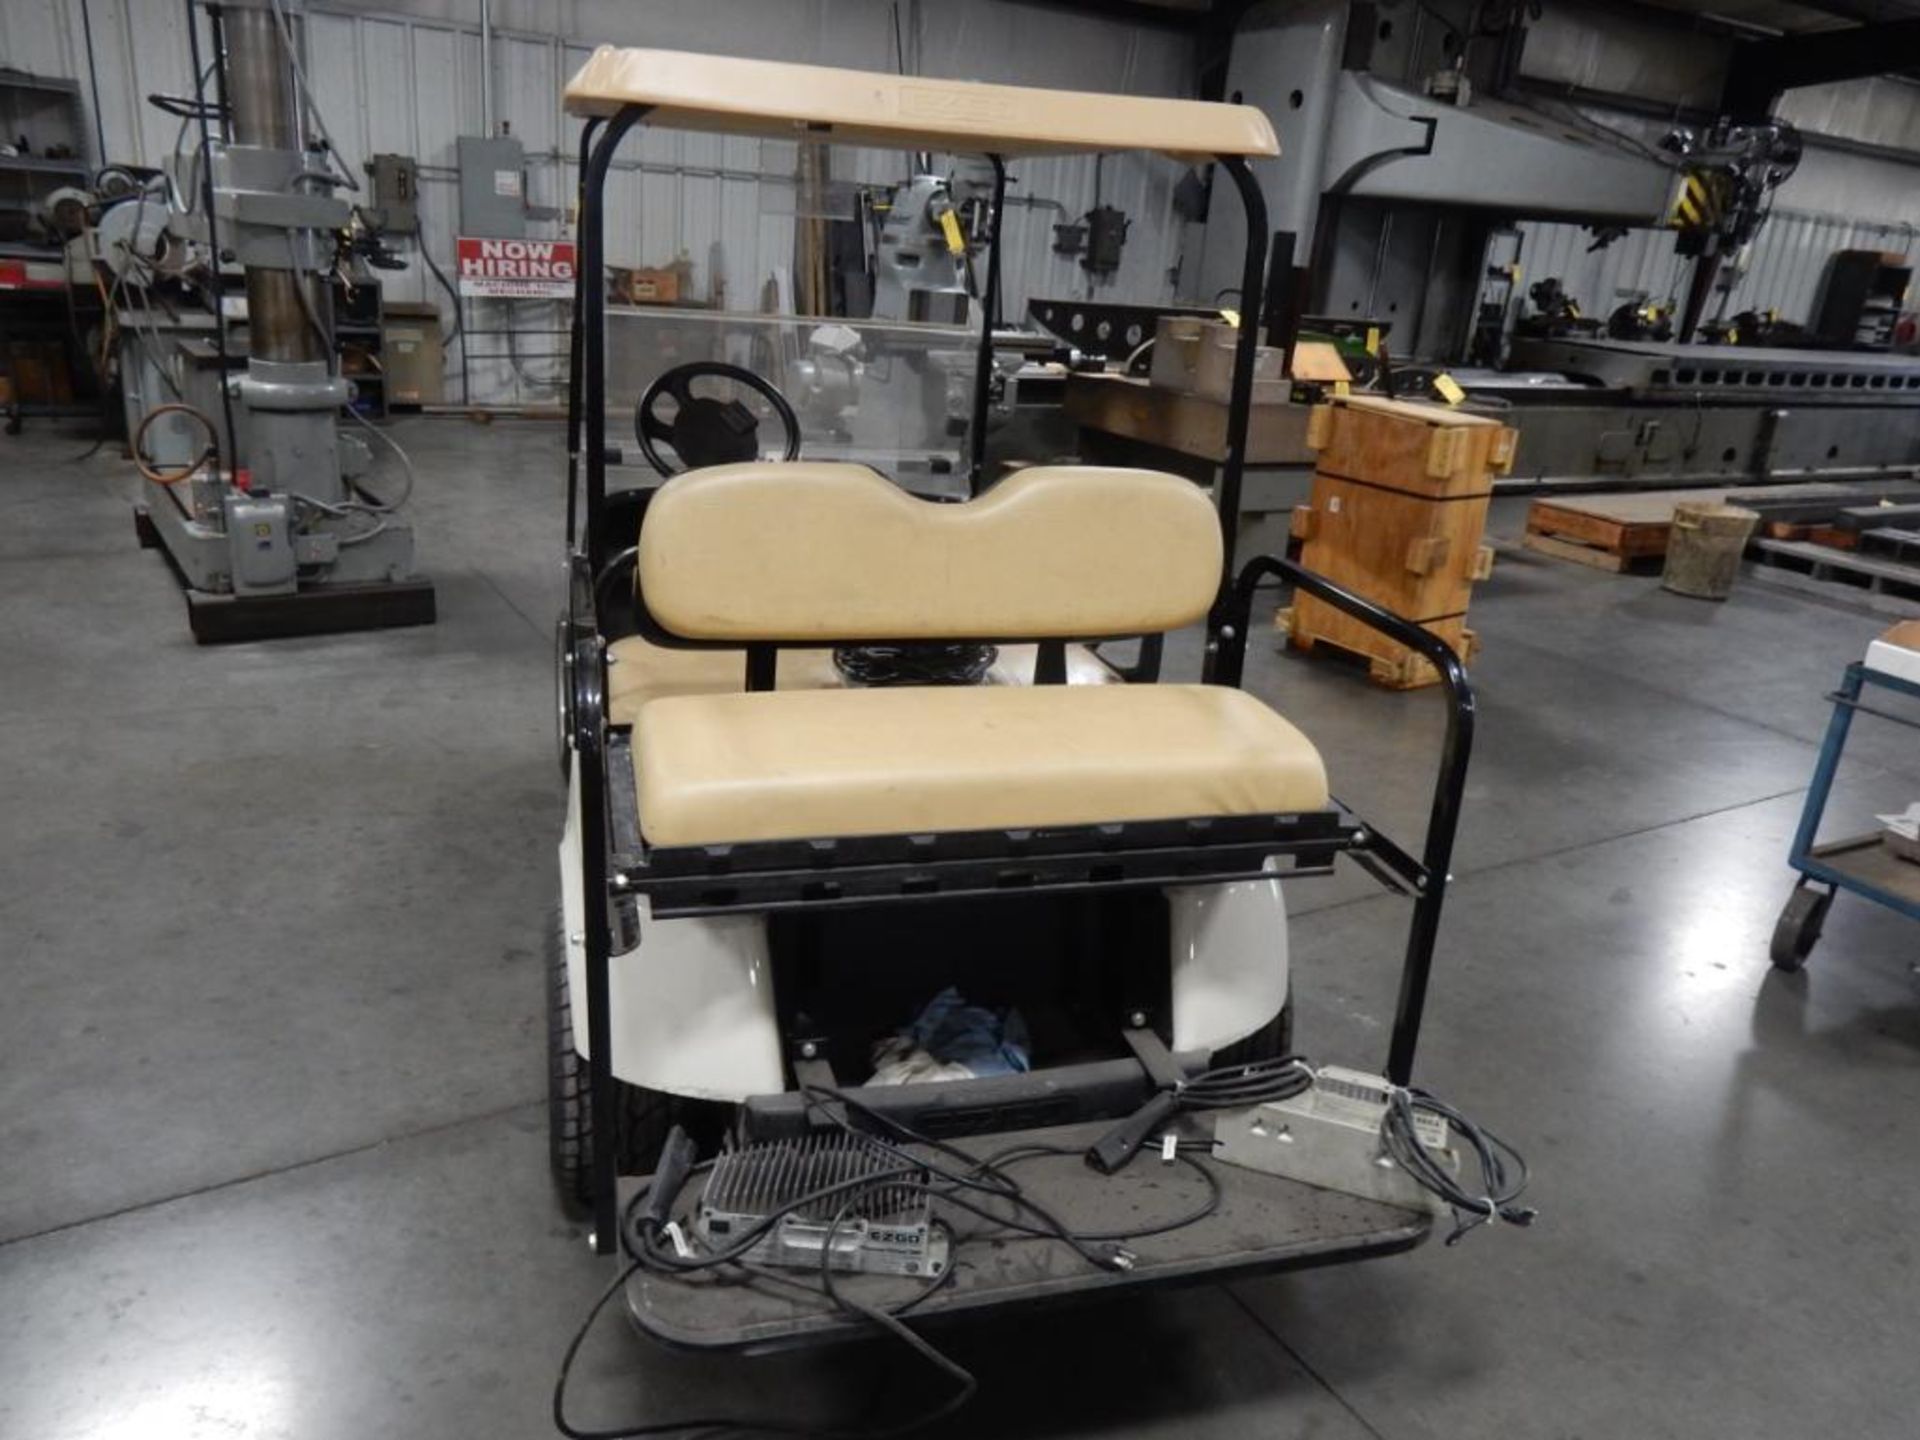 E-Z-GO GOLF CART, CANOPY, REAR FLIP SEAT, MAG WHEELS, WINDSHIELD, CHARGER - Image 4 of 6